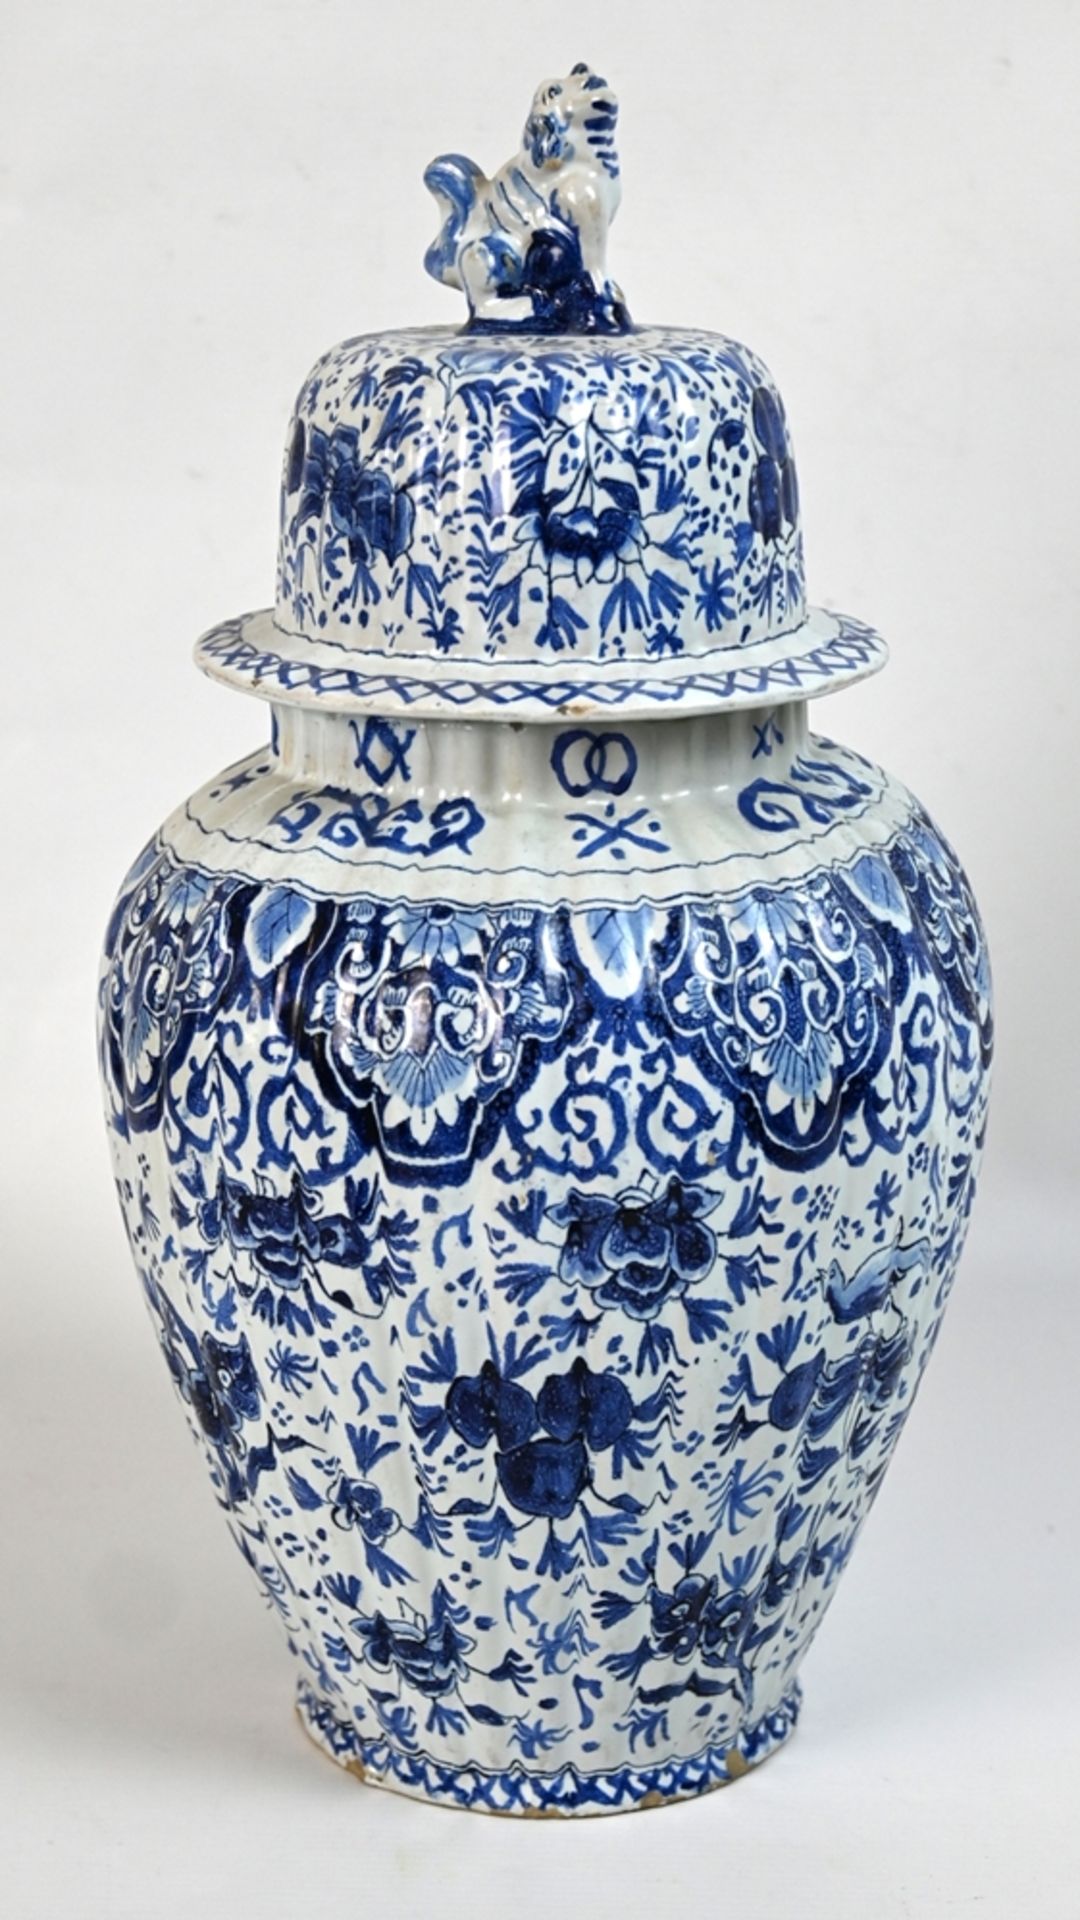 Lidded vase from Delft, around 1710/20. Blue painting with stylised flowers, fruit and birds. - Image 3 of 4